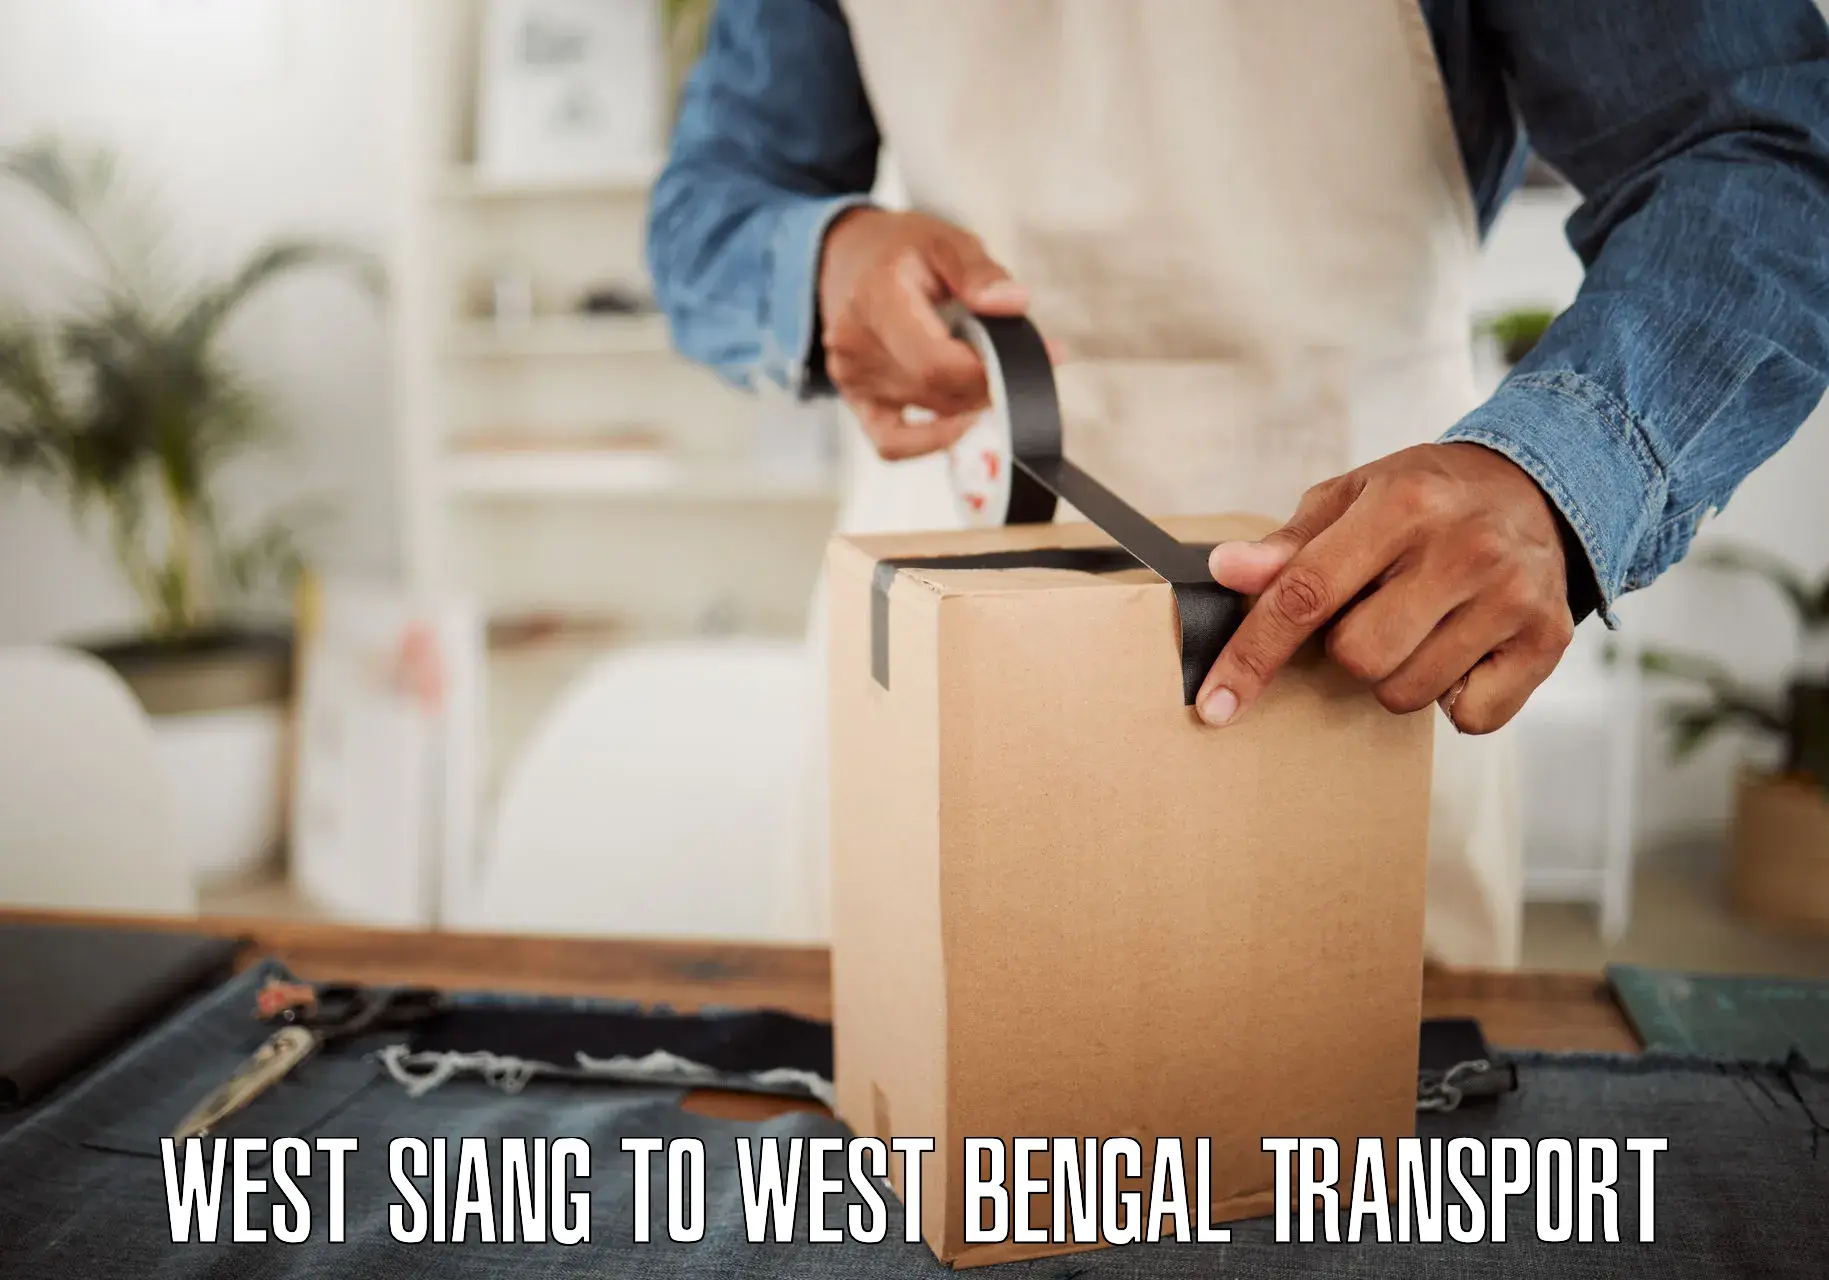 Domestic transport services West Siang to Park Street